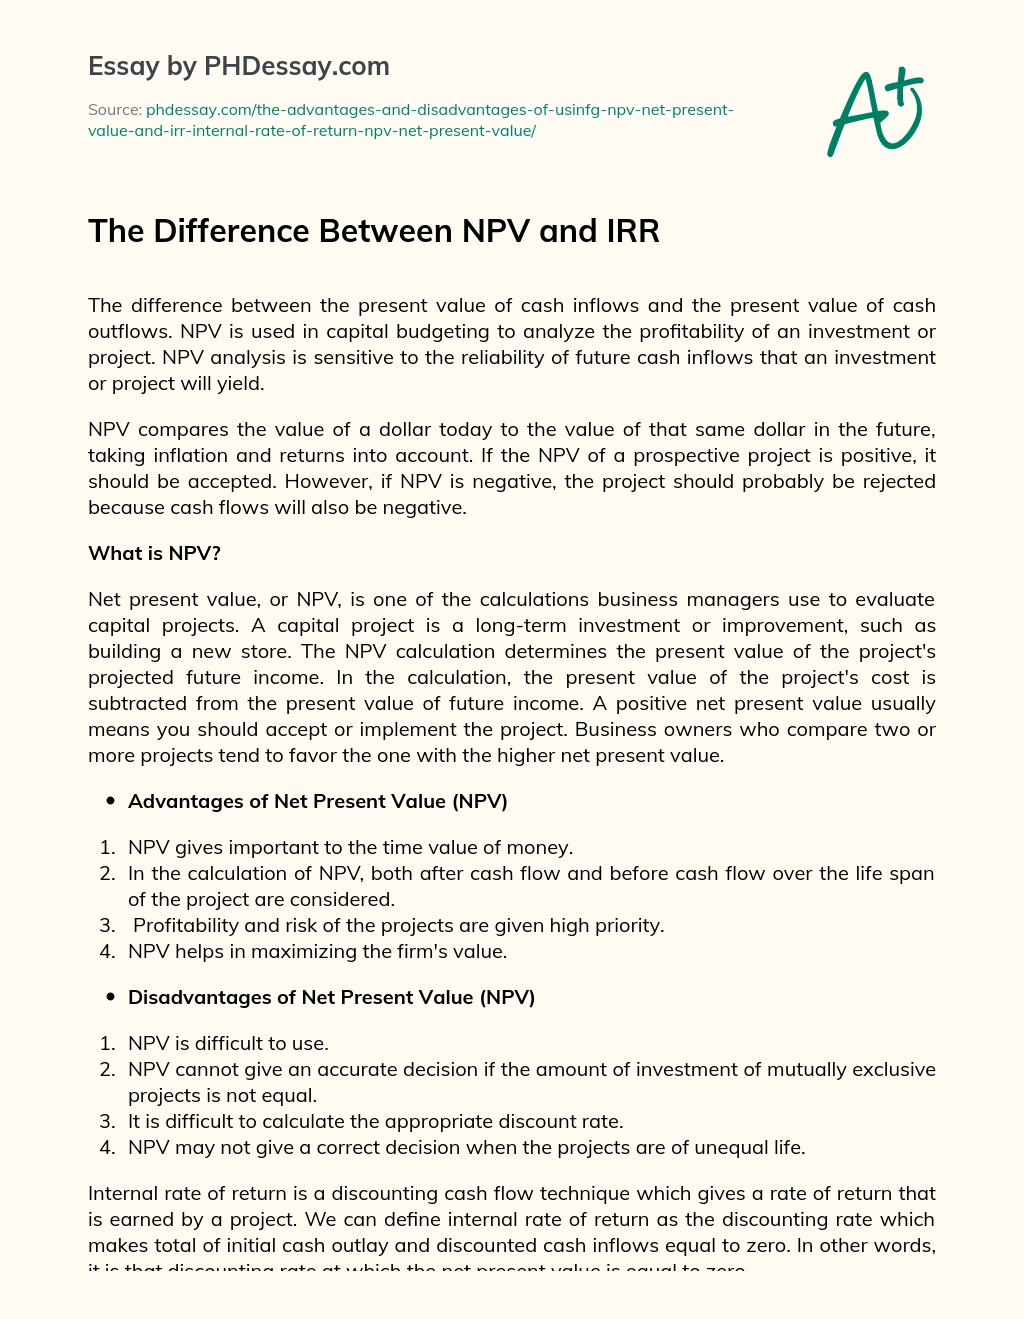 advantages of using npv